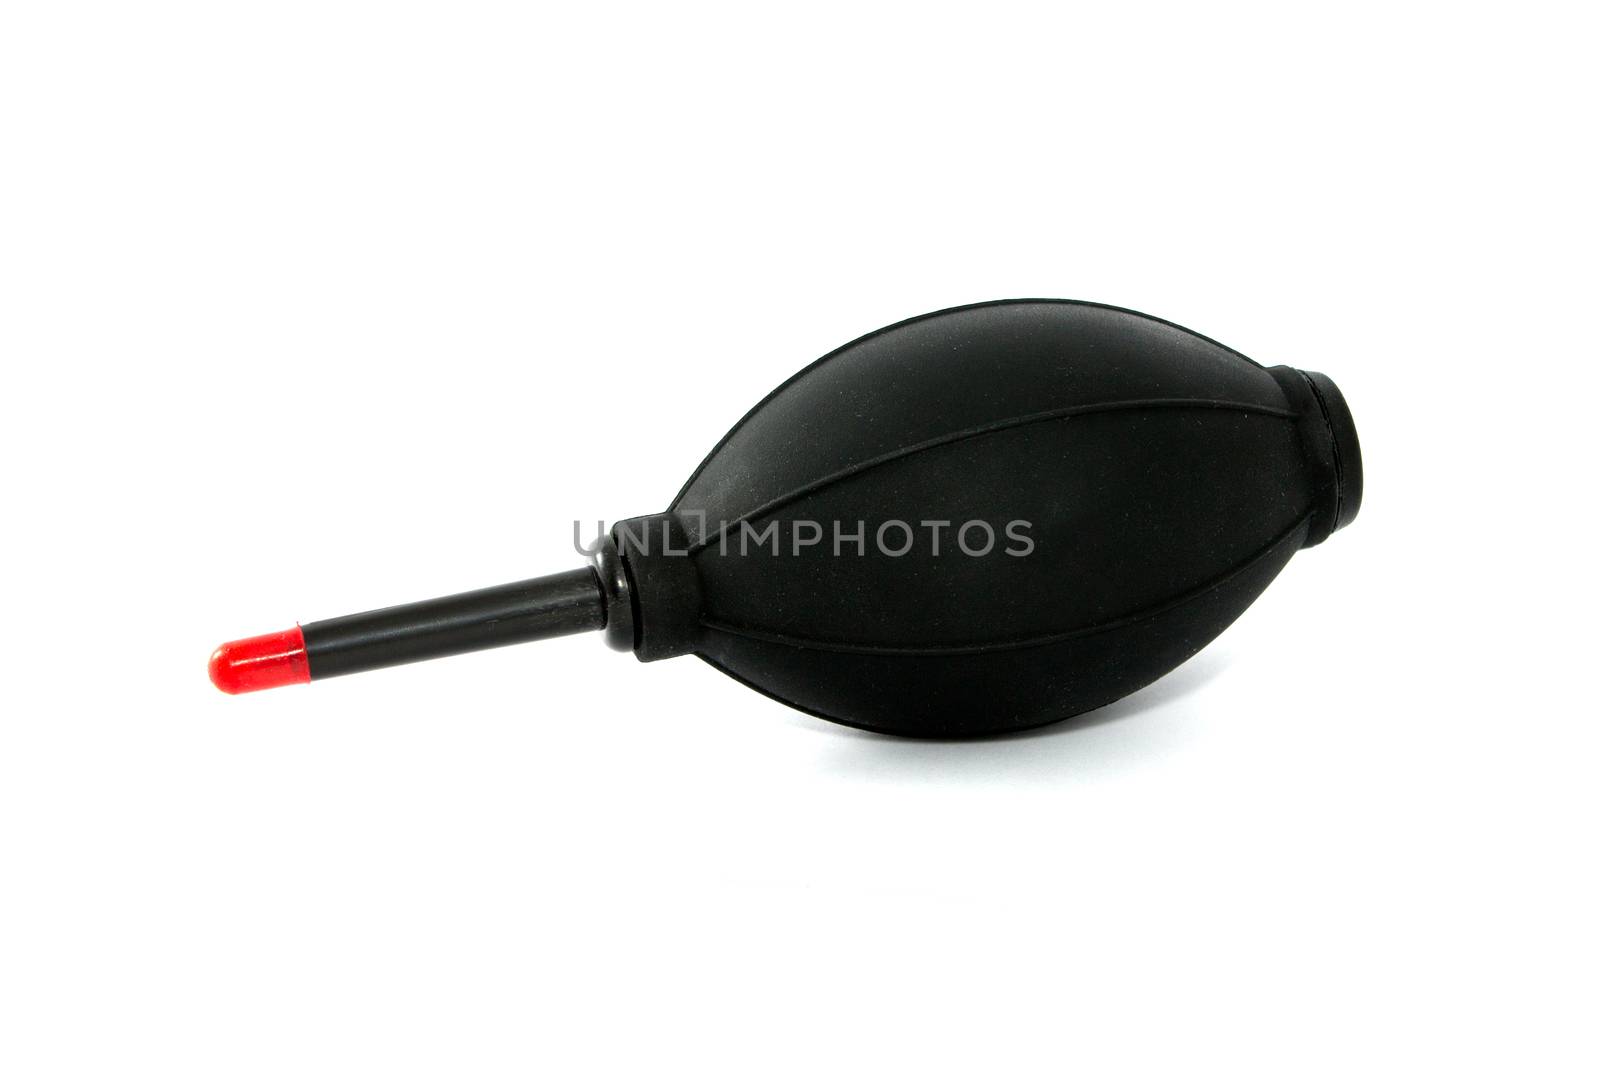 Rubber air pump blower for blowing the dust away , over white background